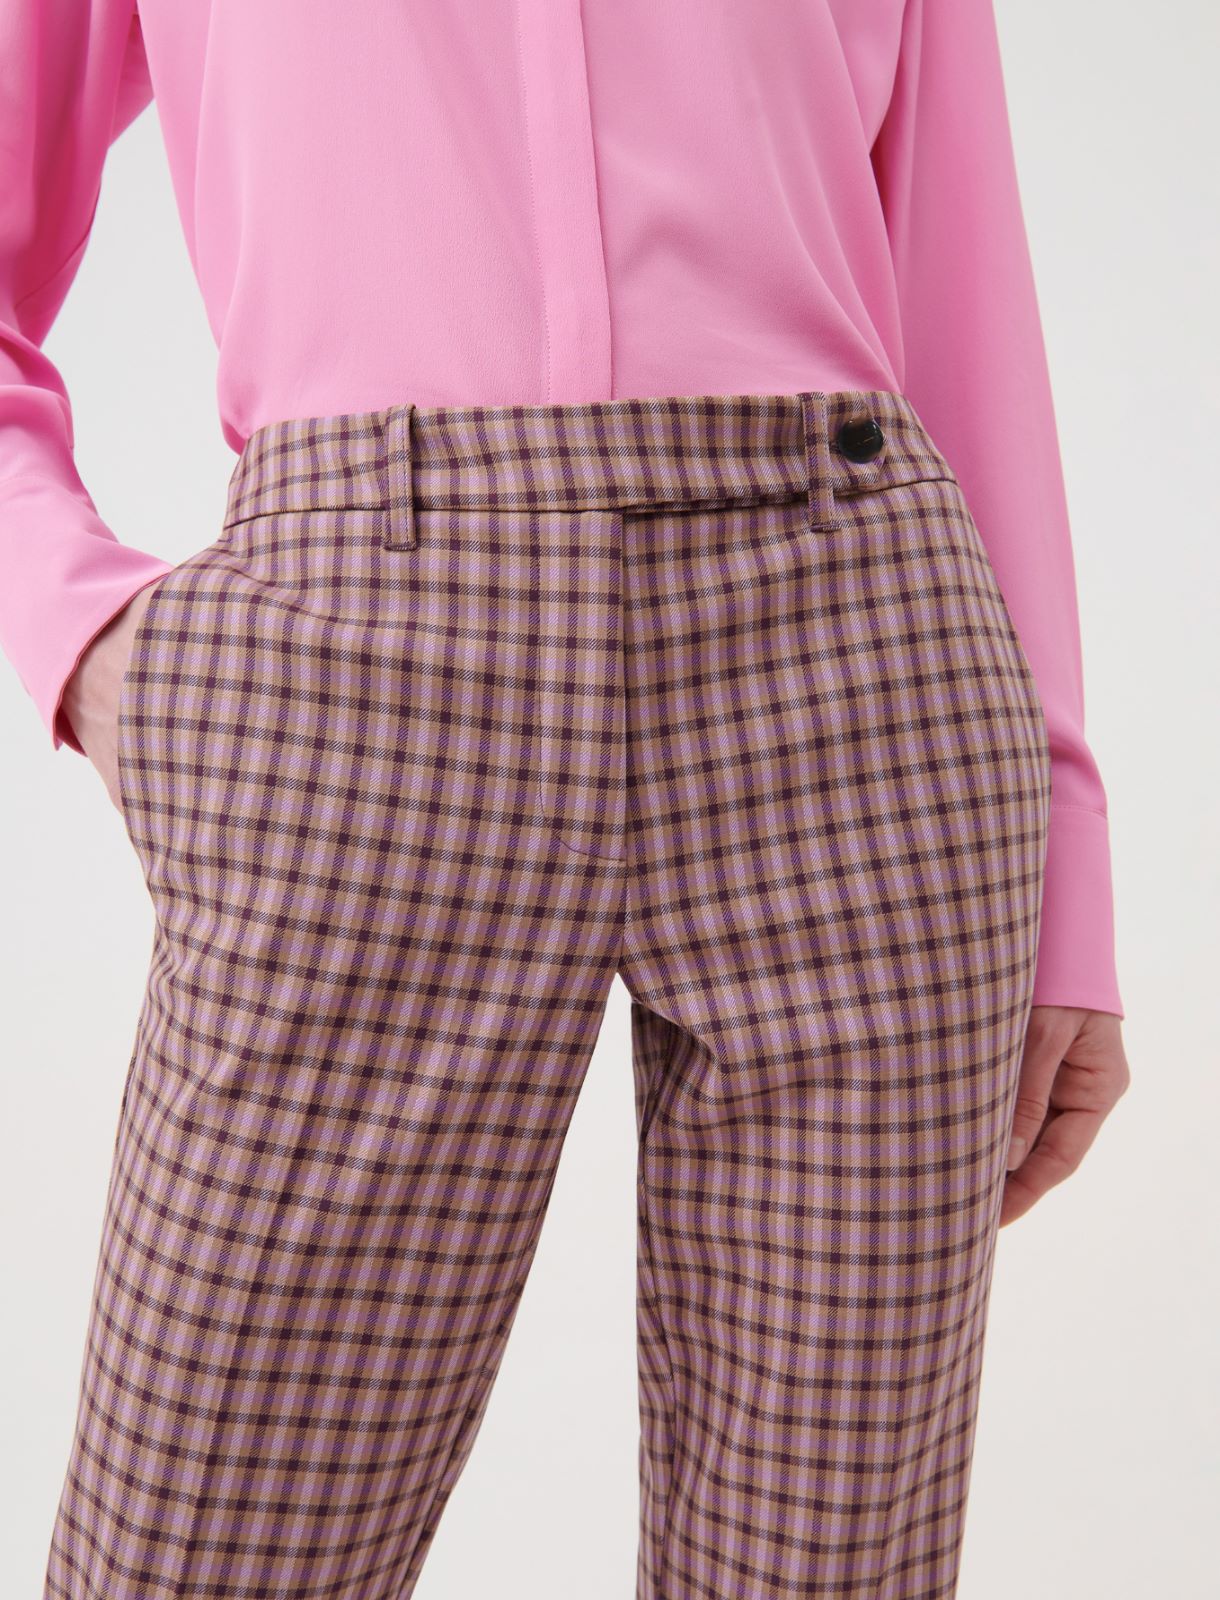 Carrot-fit trousers - Must - Marella - 4